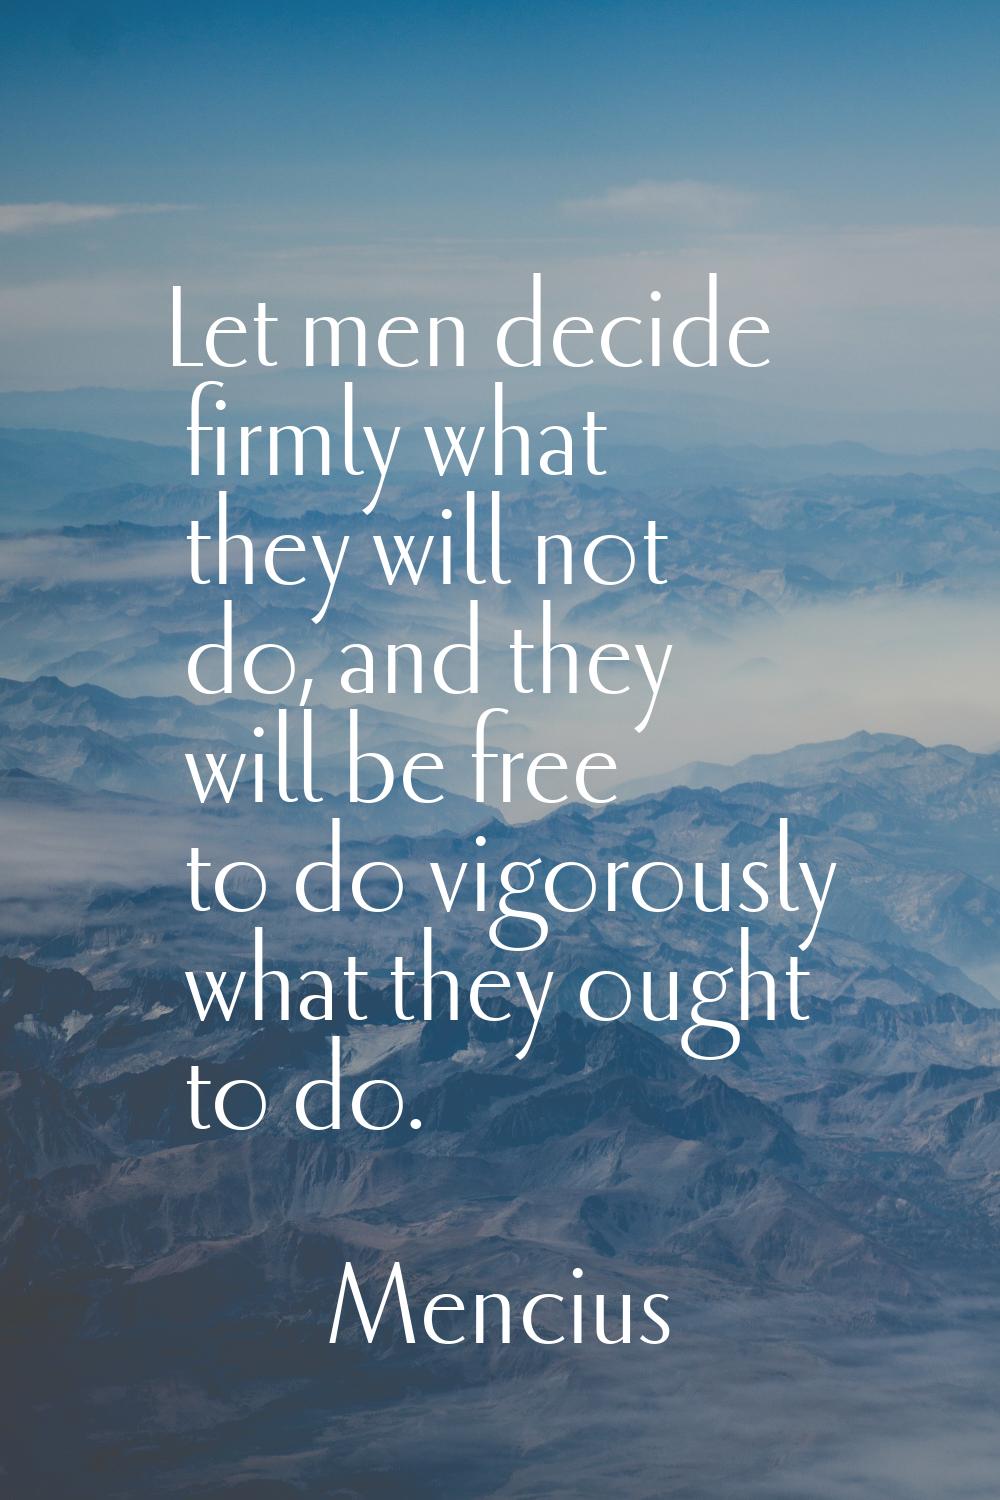 Let men decide firmly what they will not do, and they will be free to do vigorously what they ought